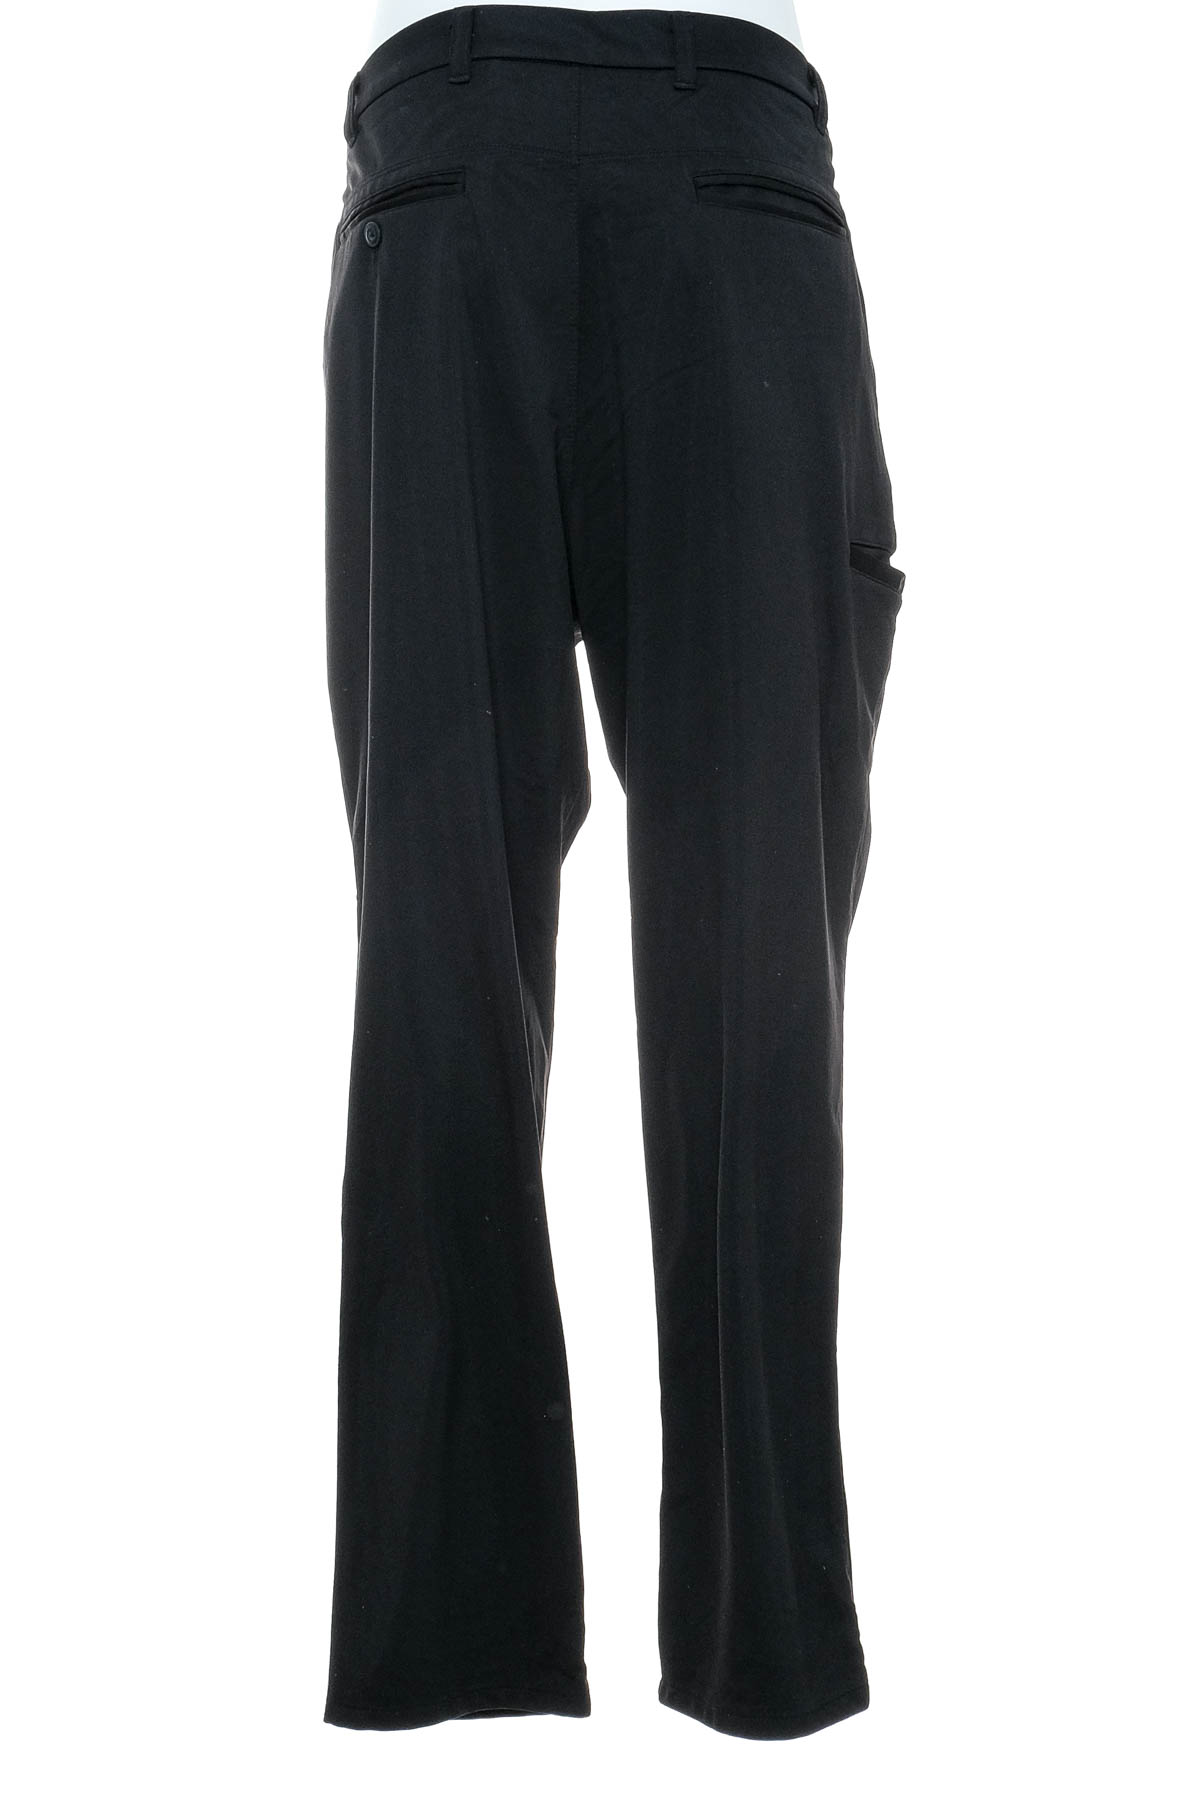 Men's trousers - Nicklaus - 1